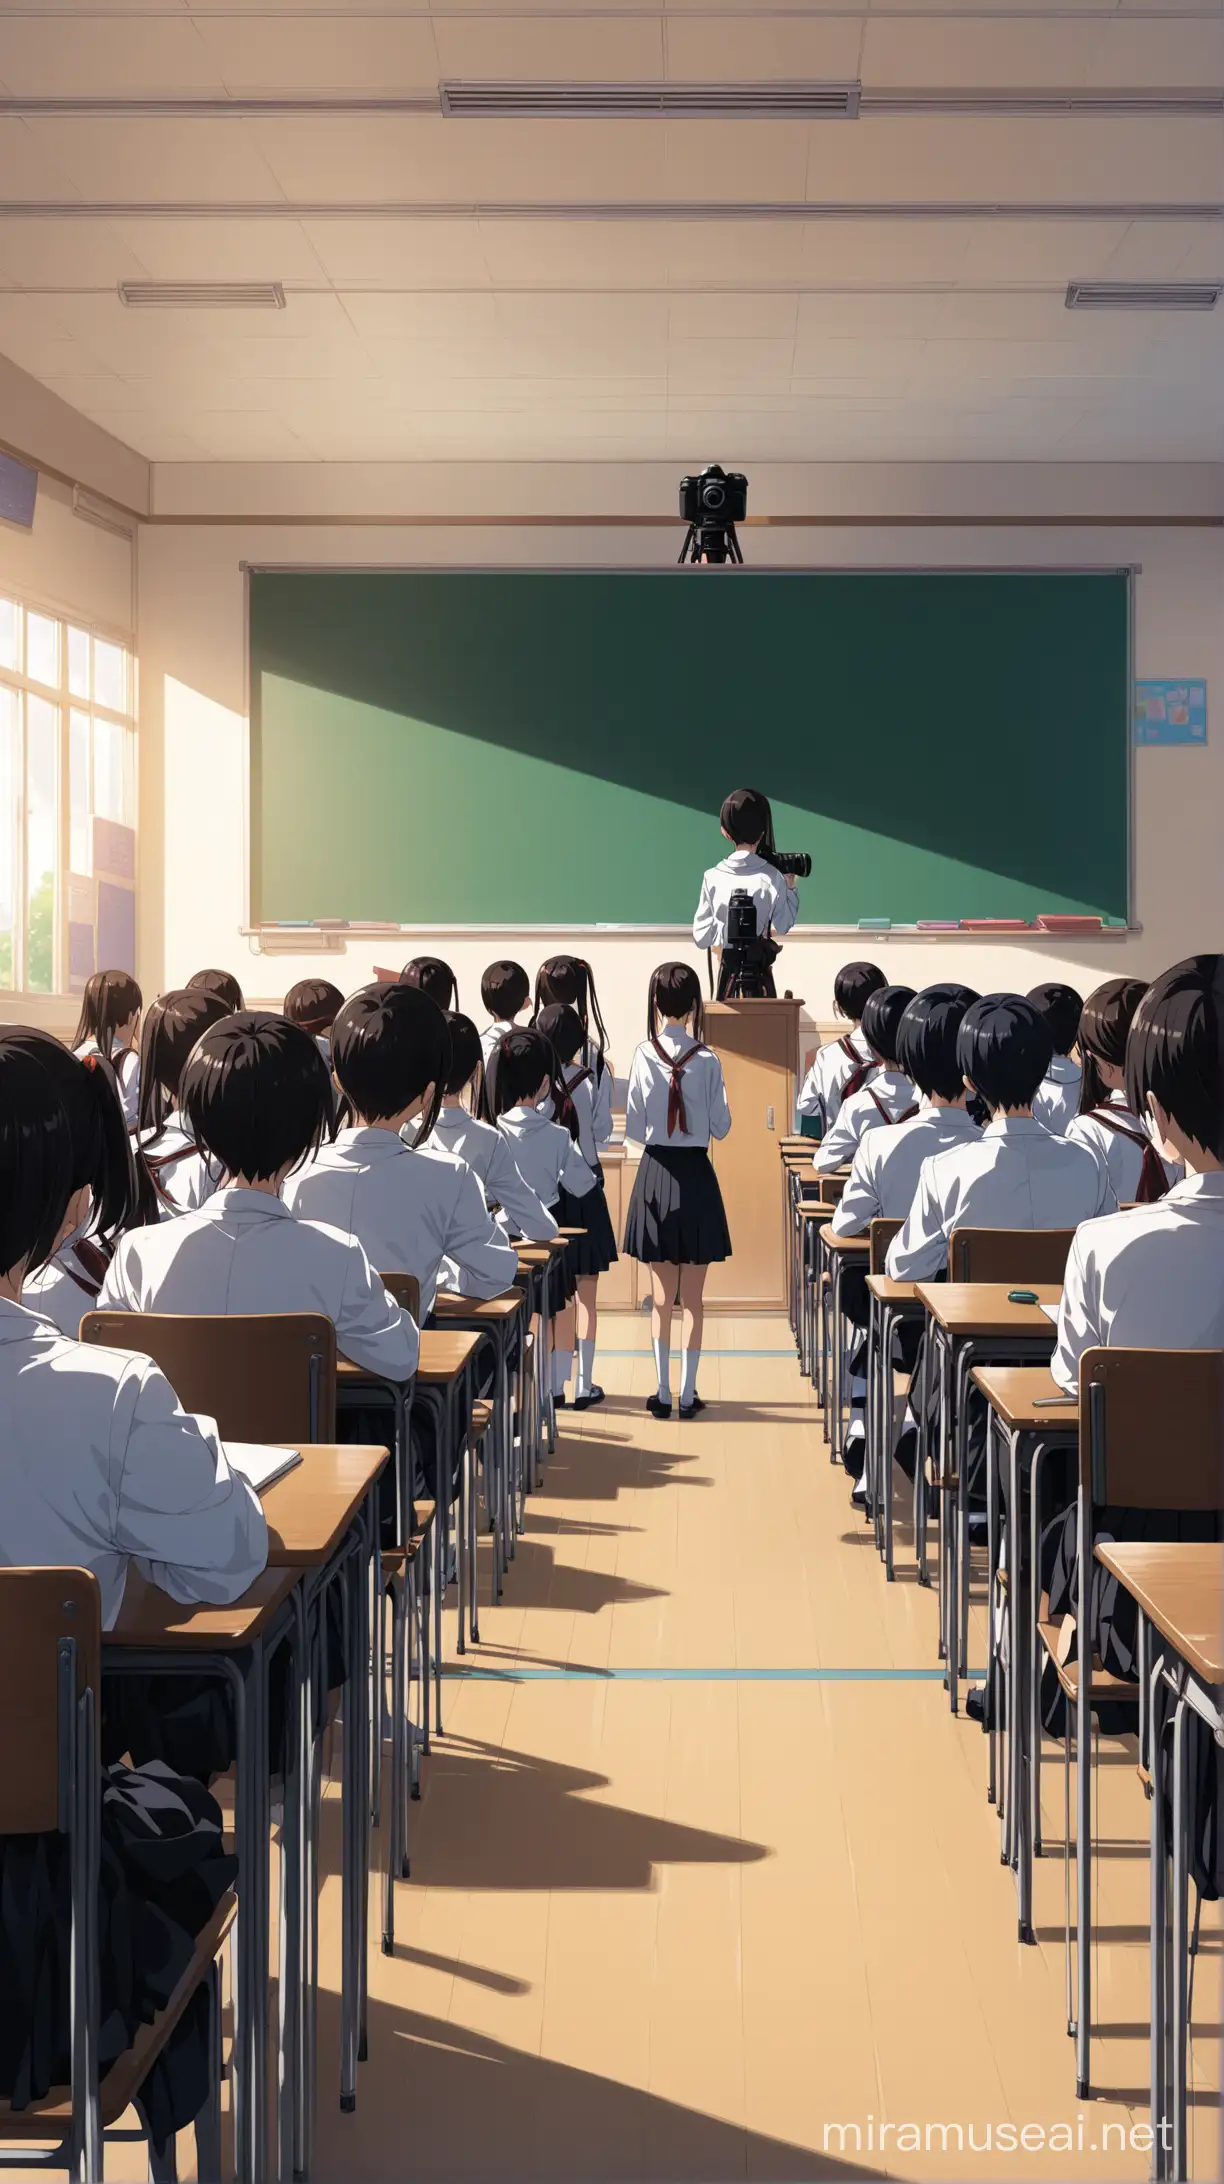 Classroom scene with many students, anime style, camera at ground level and at the front of the class, straight shot facing the front of the room 